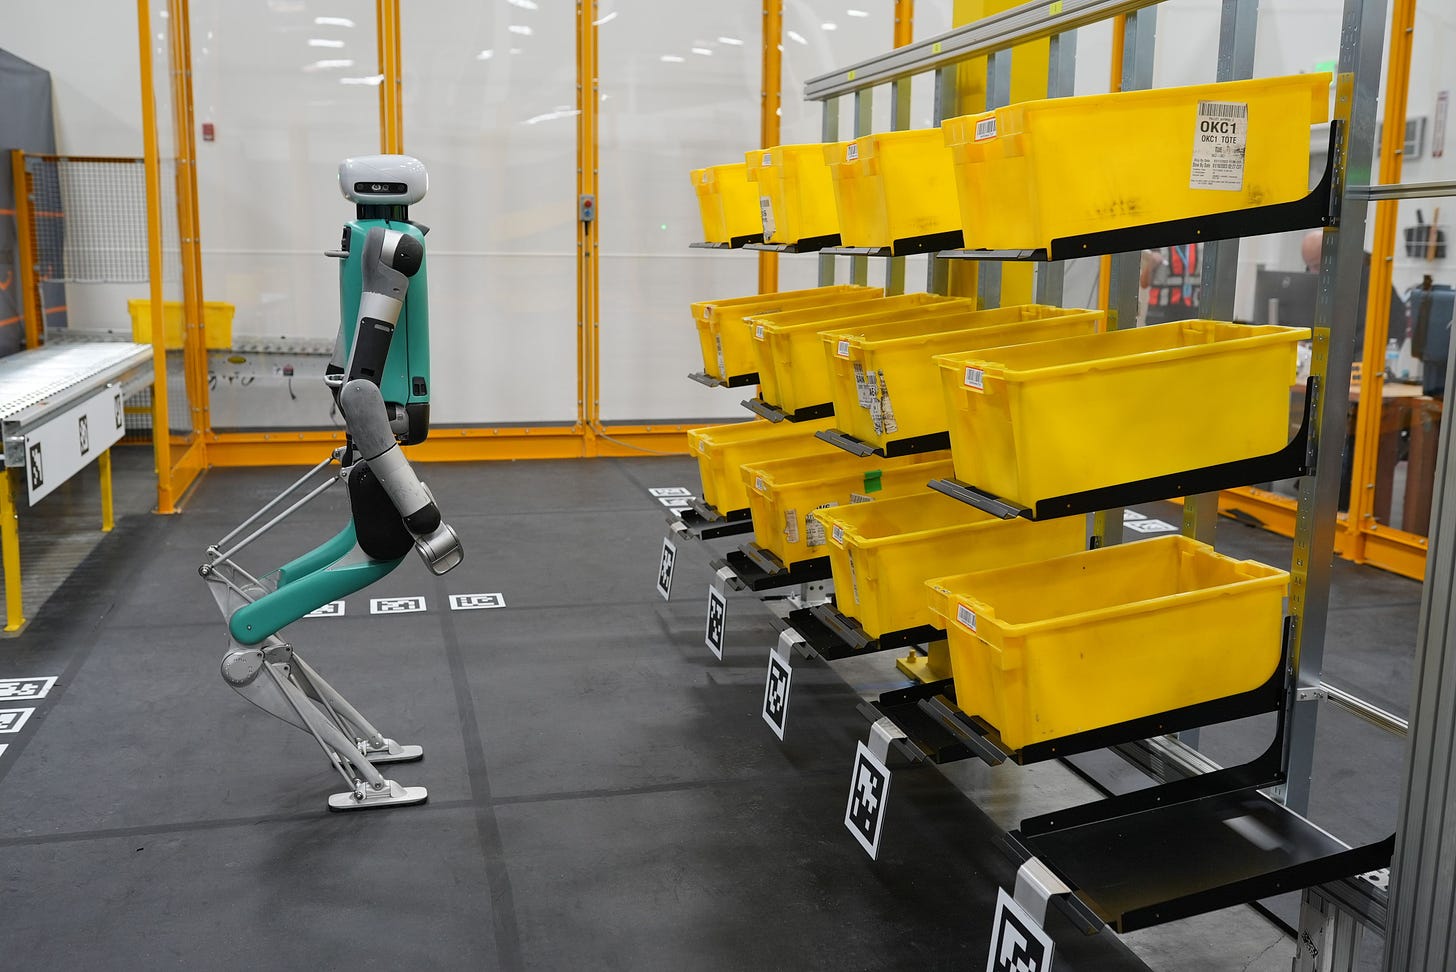 A humanoid robot stands in front of a series of yellow bins for hauling materials.